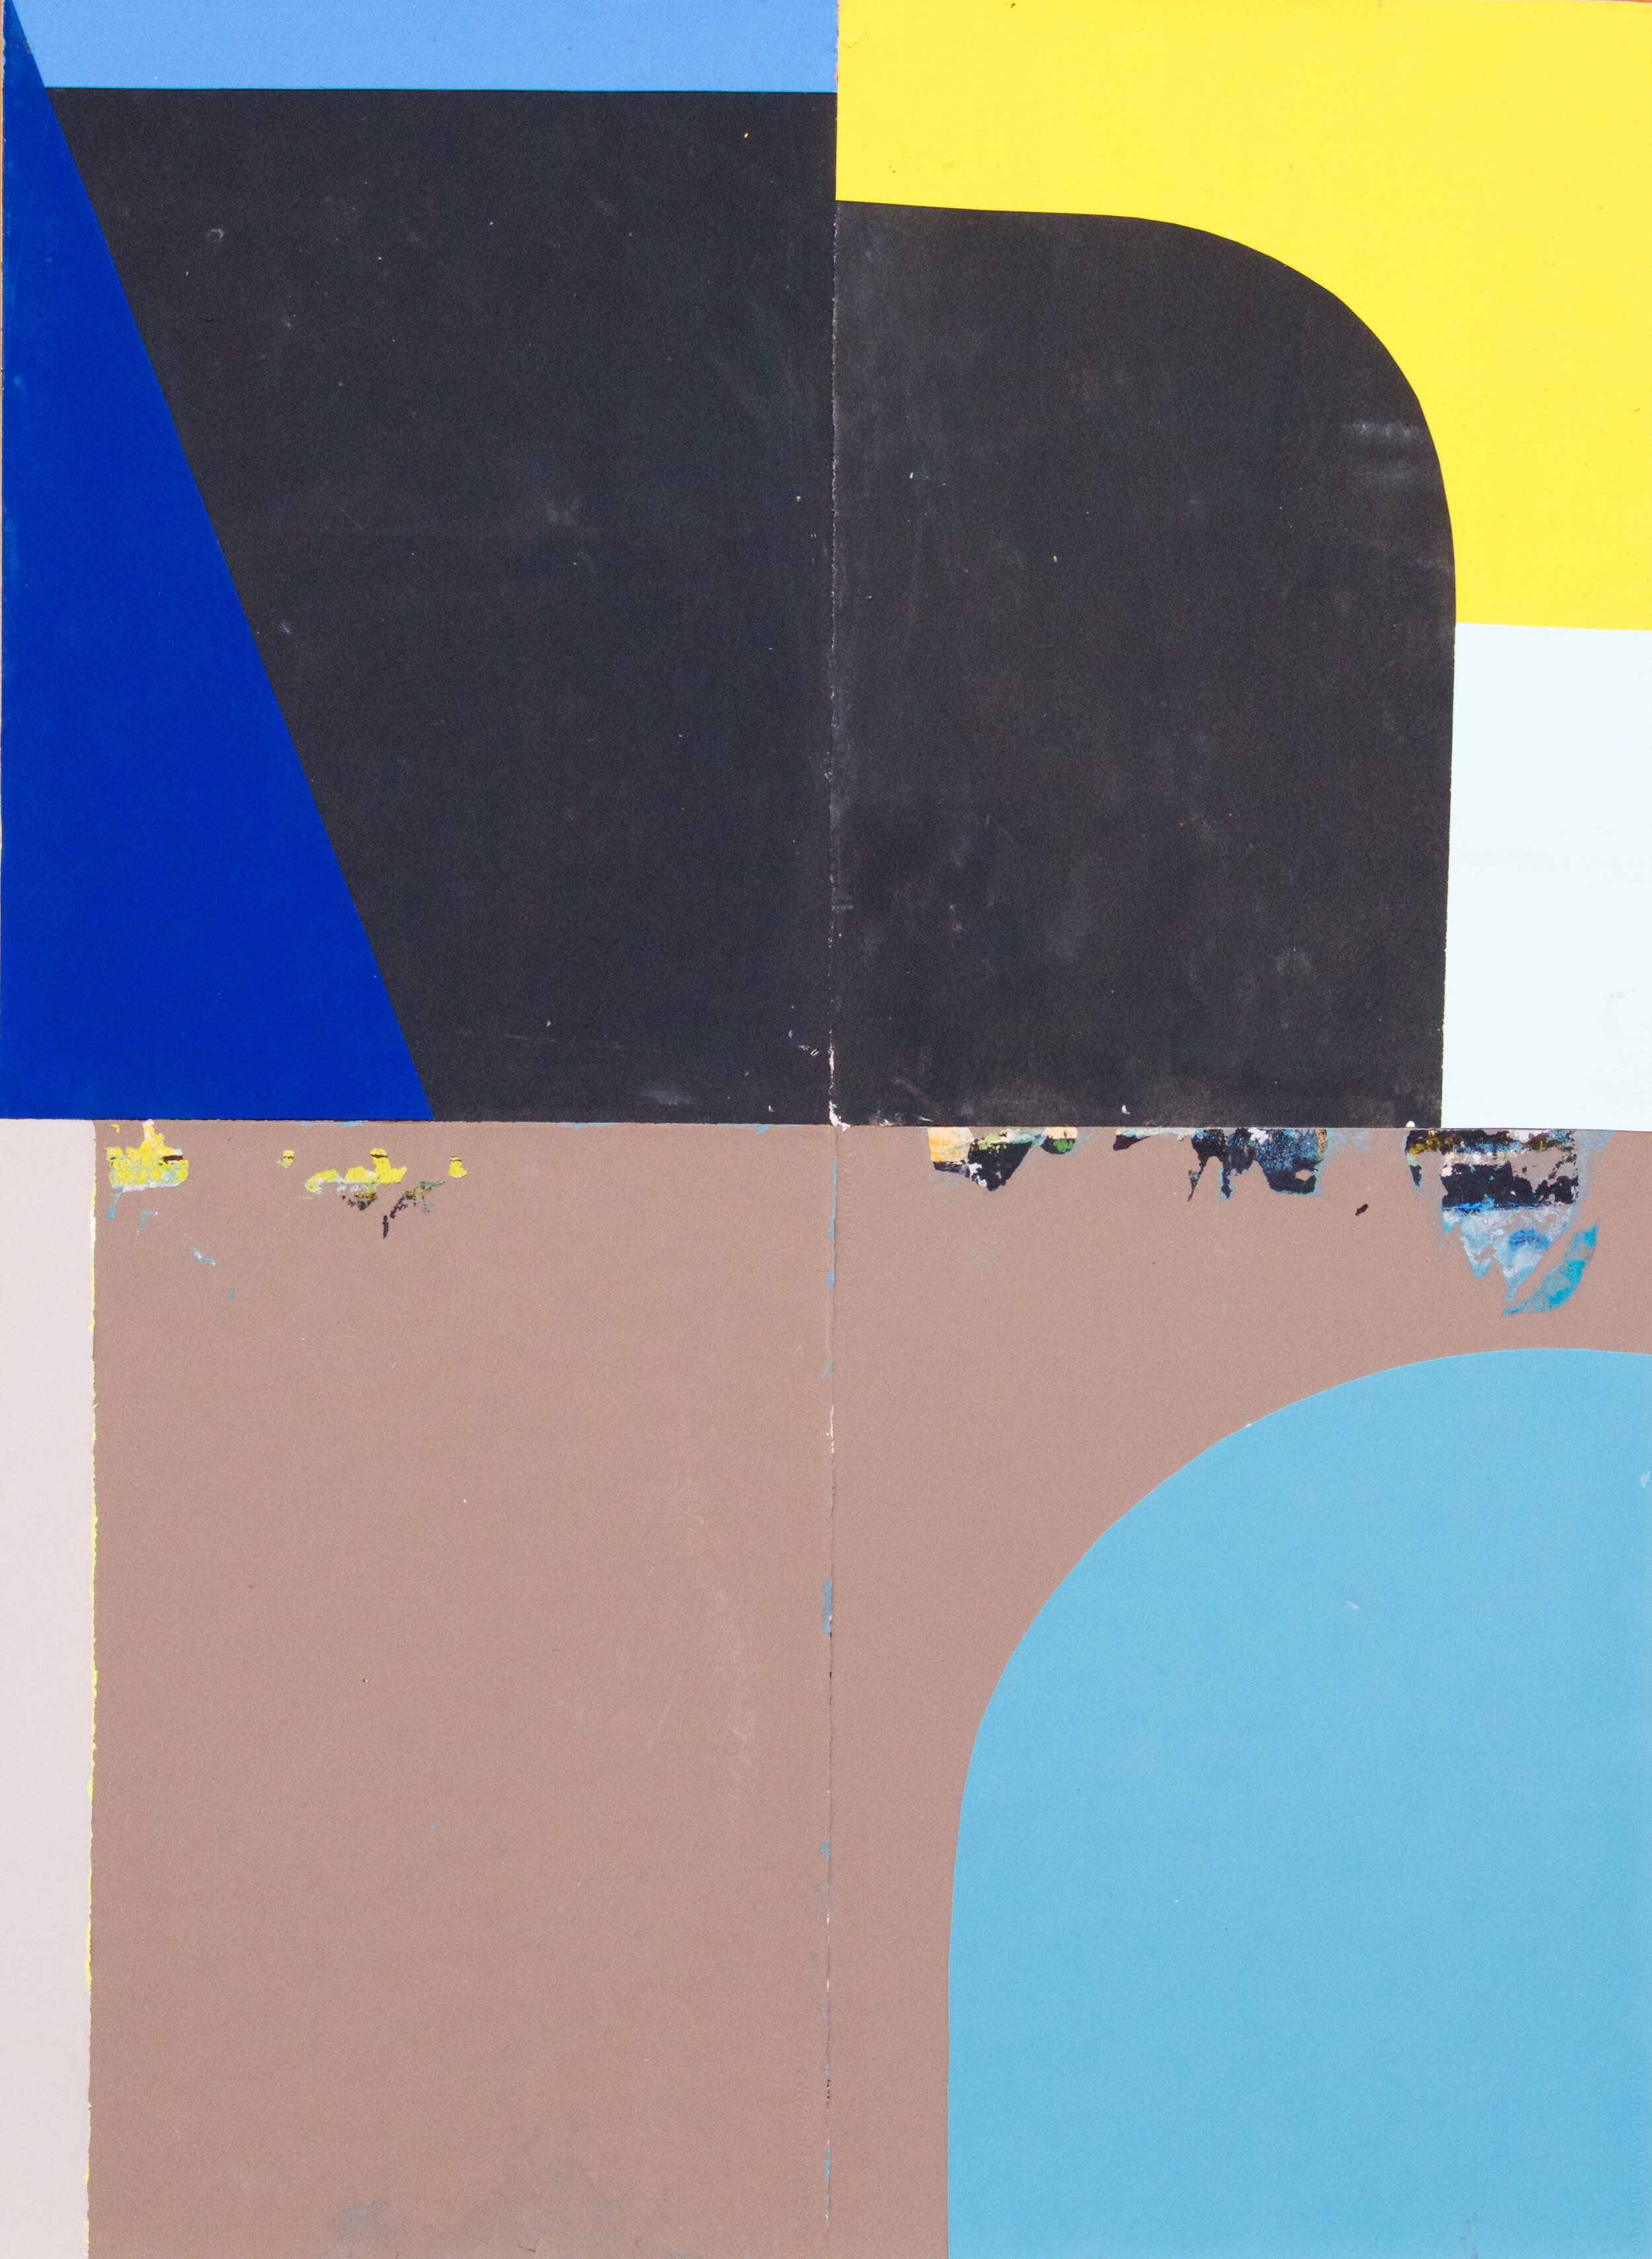 Aeroplane_Acrylic and emulsion on watercolour paper and ply_150 x 110 cm_2019.jpg